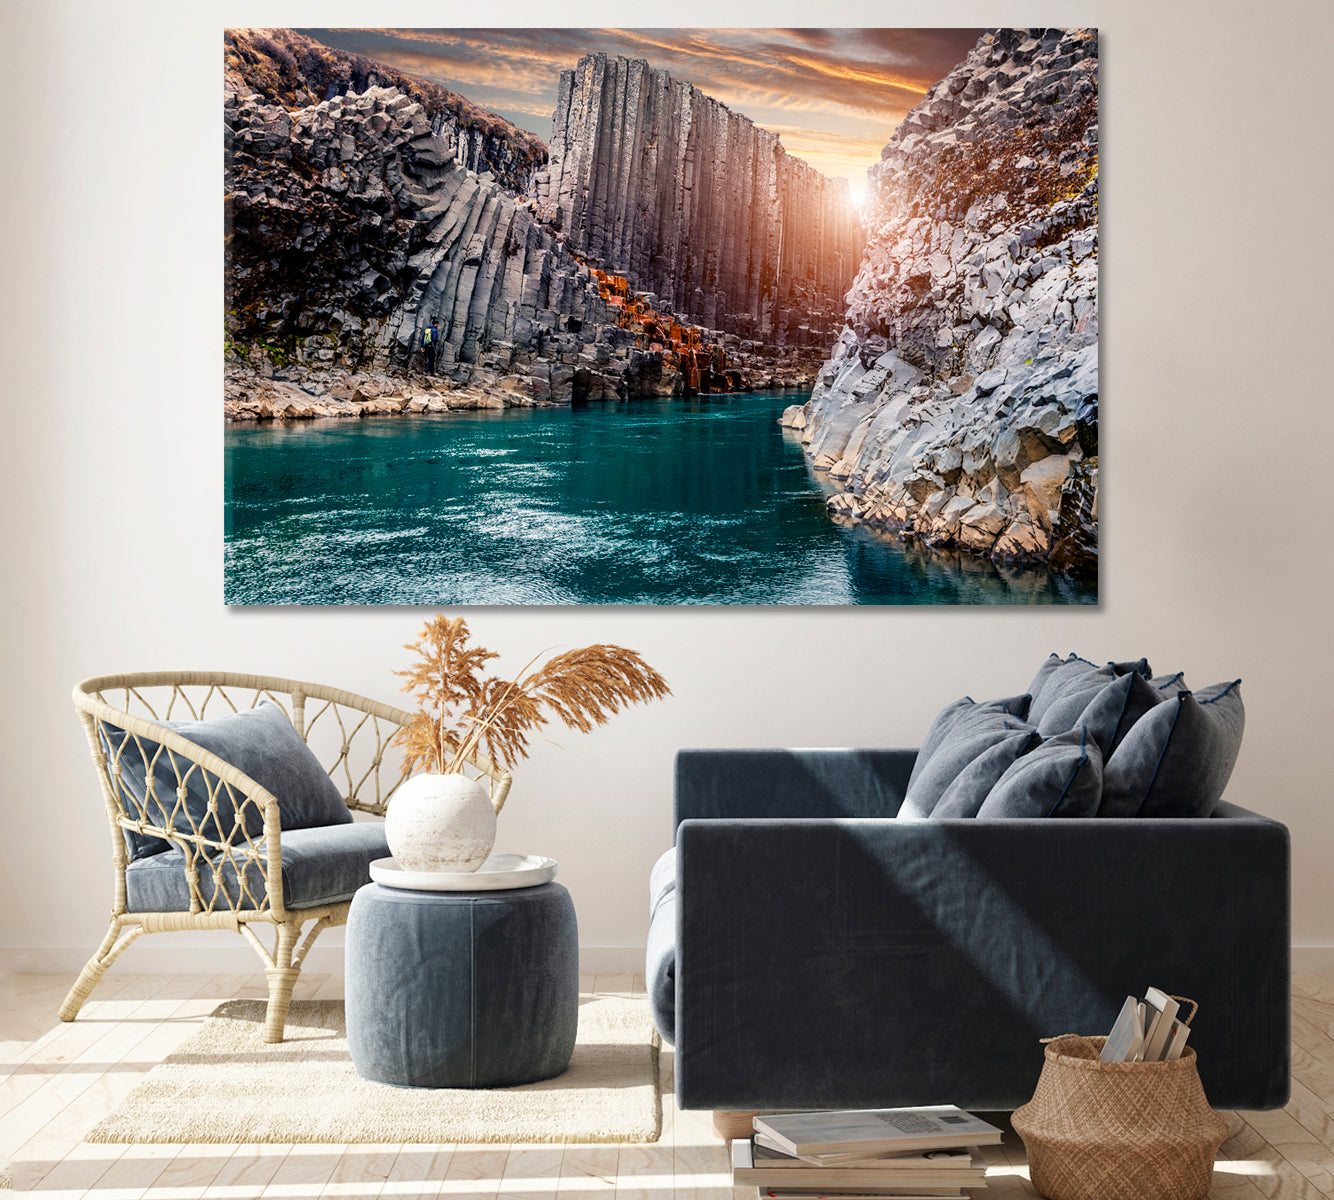 Studlagil Canyon Nature Landscape of Iceland Canvas Print ArtLexy 1 Panel 24"x16" inches 